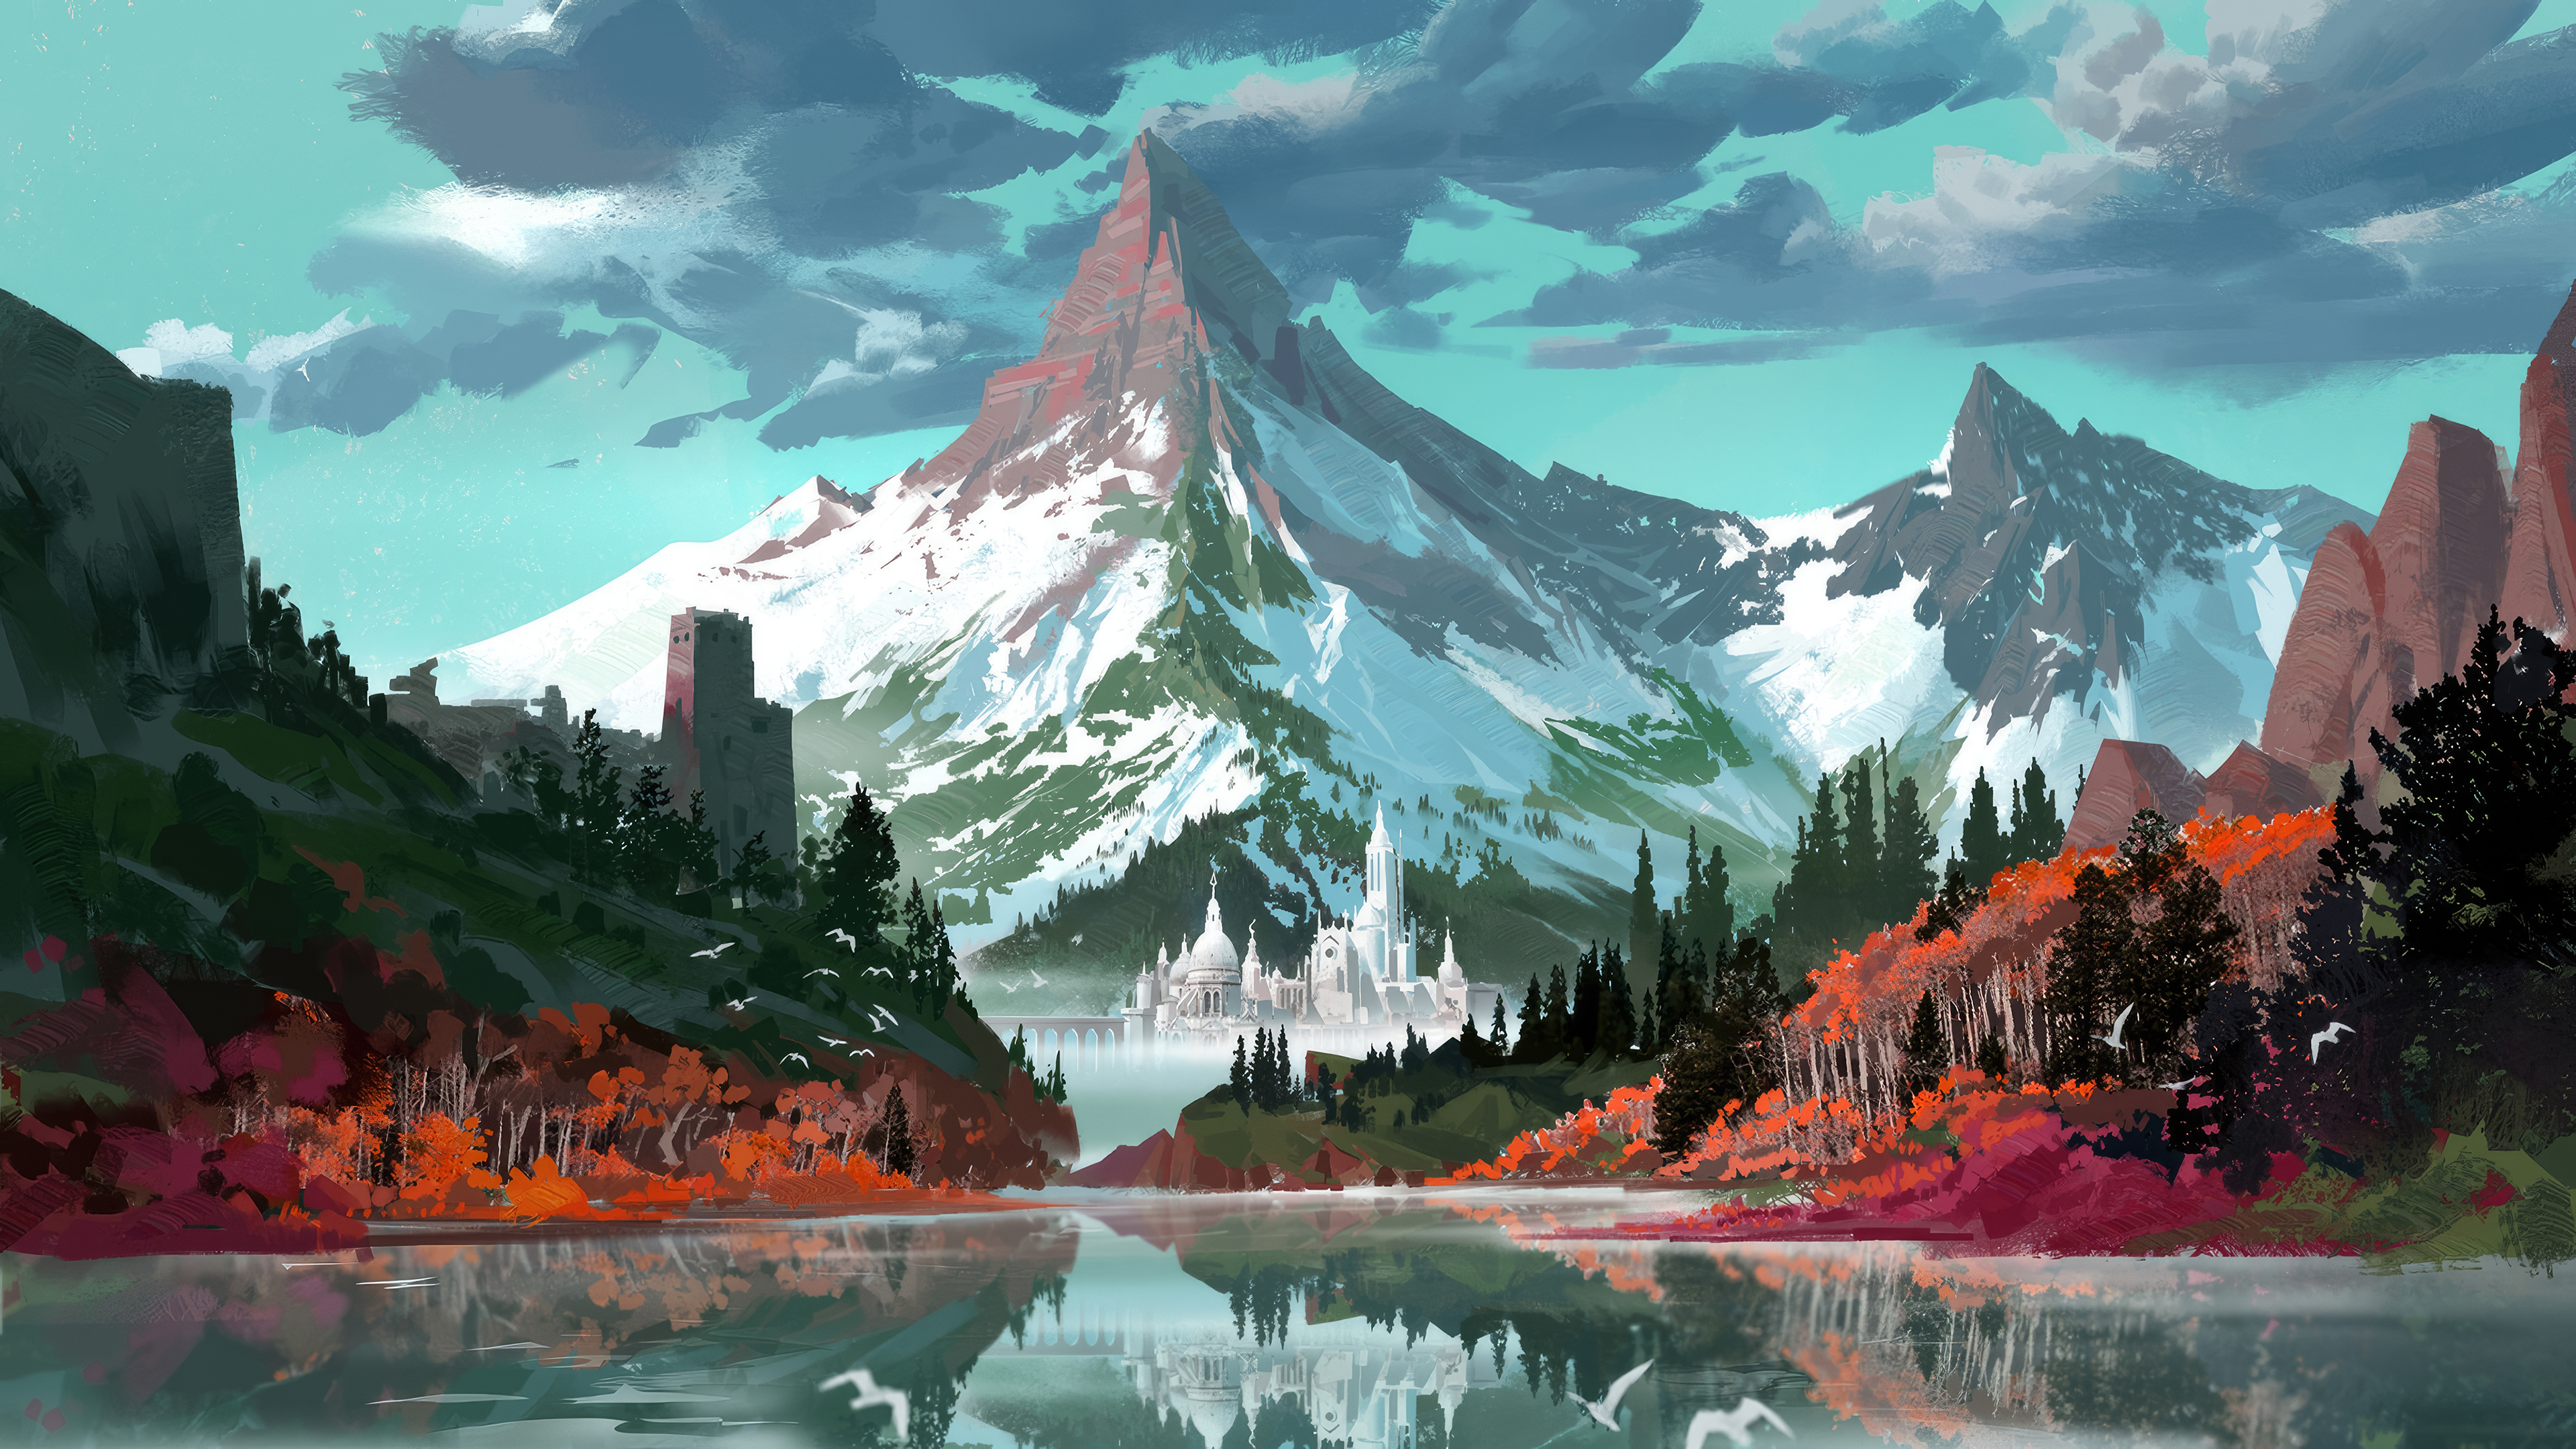 Digital Painting Digital Art Mountains Lake Forest Clouds Fall Castle Ruins Reflection Water Sky Sno 3840x2160